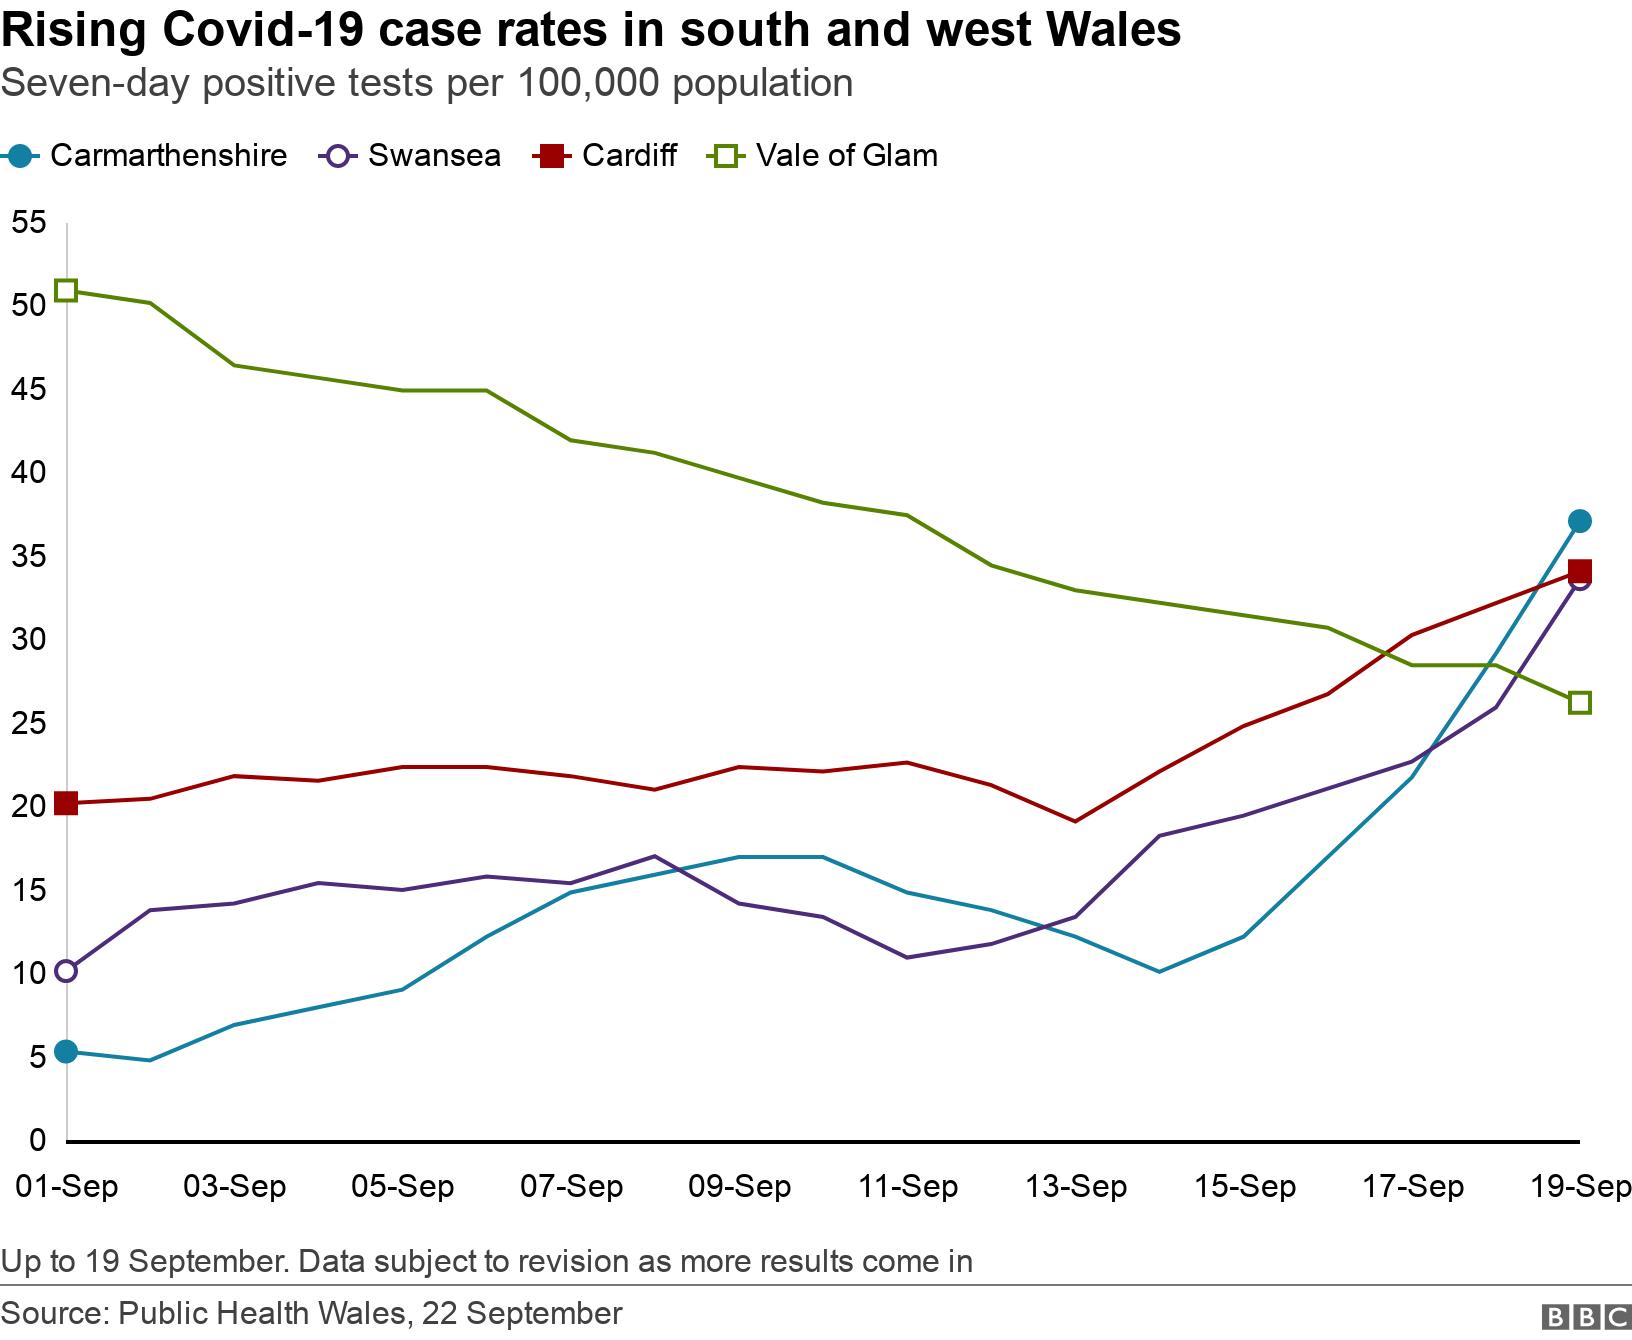 Rising Covid-19 case rates in south and west Wales. Seven-day positive tests per 100,000 population.  Up to 19 September. Data subject to revision as more results come in.